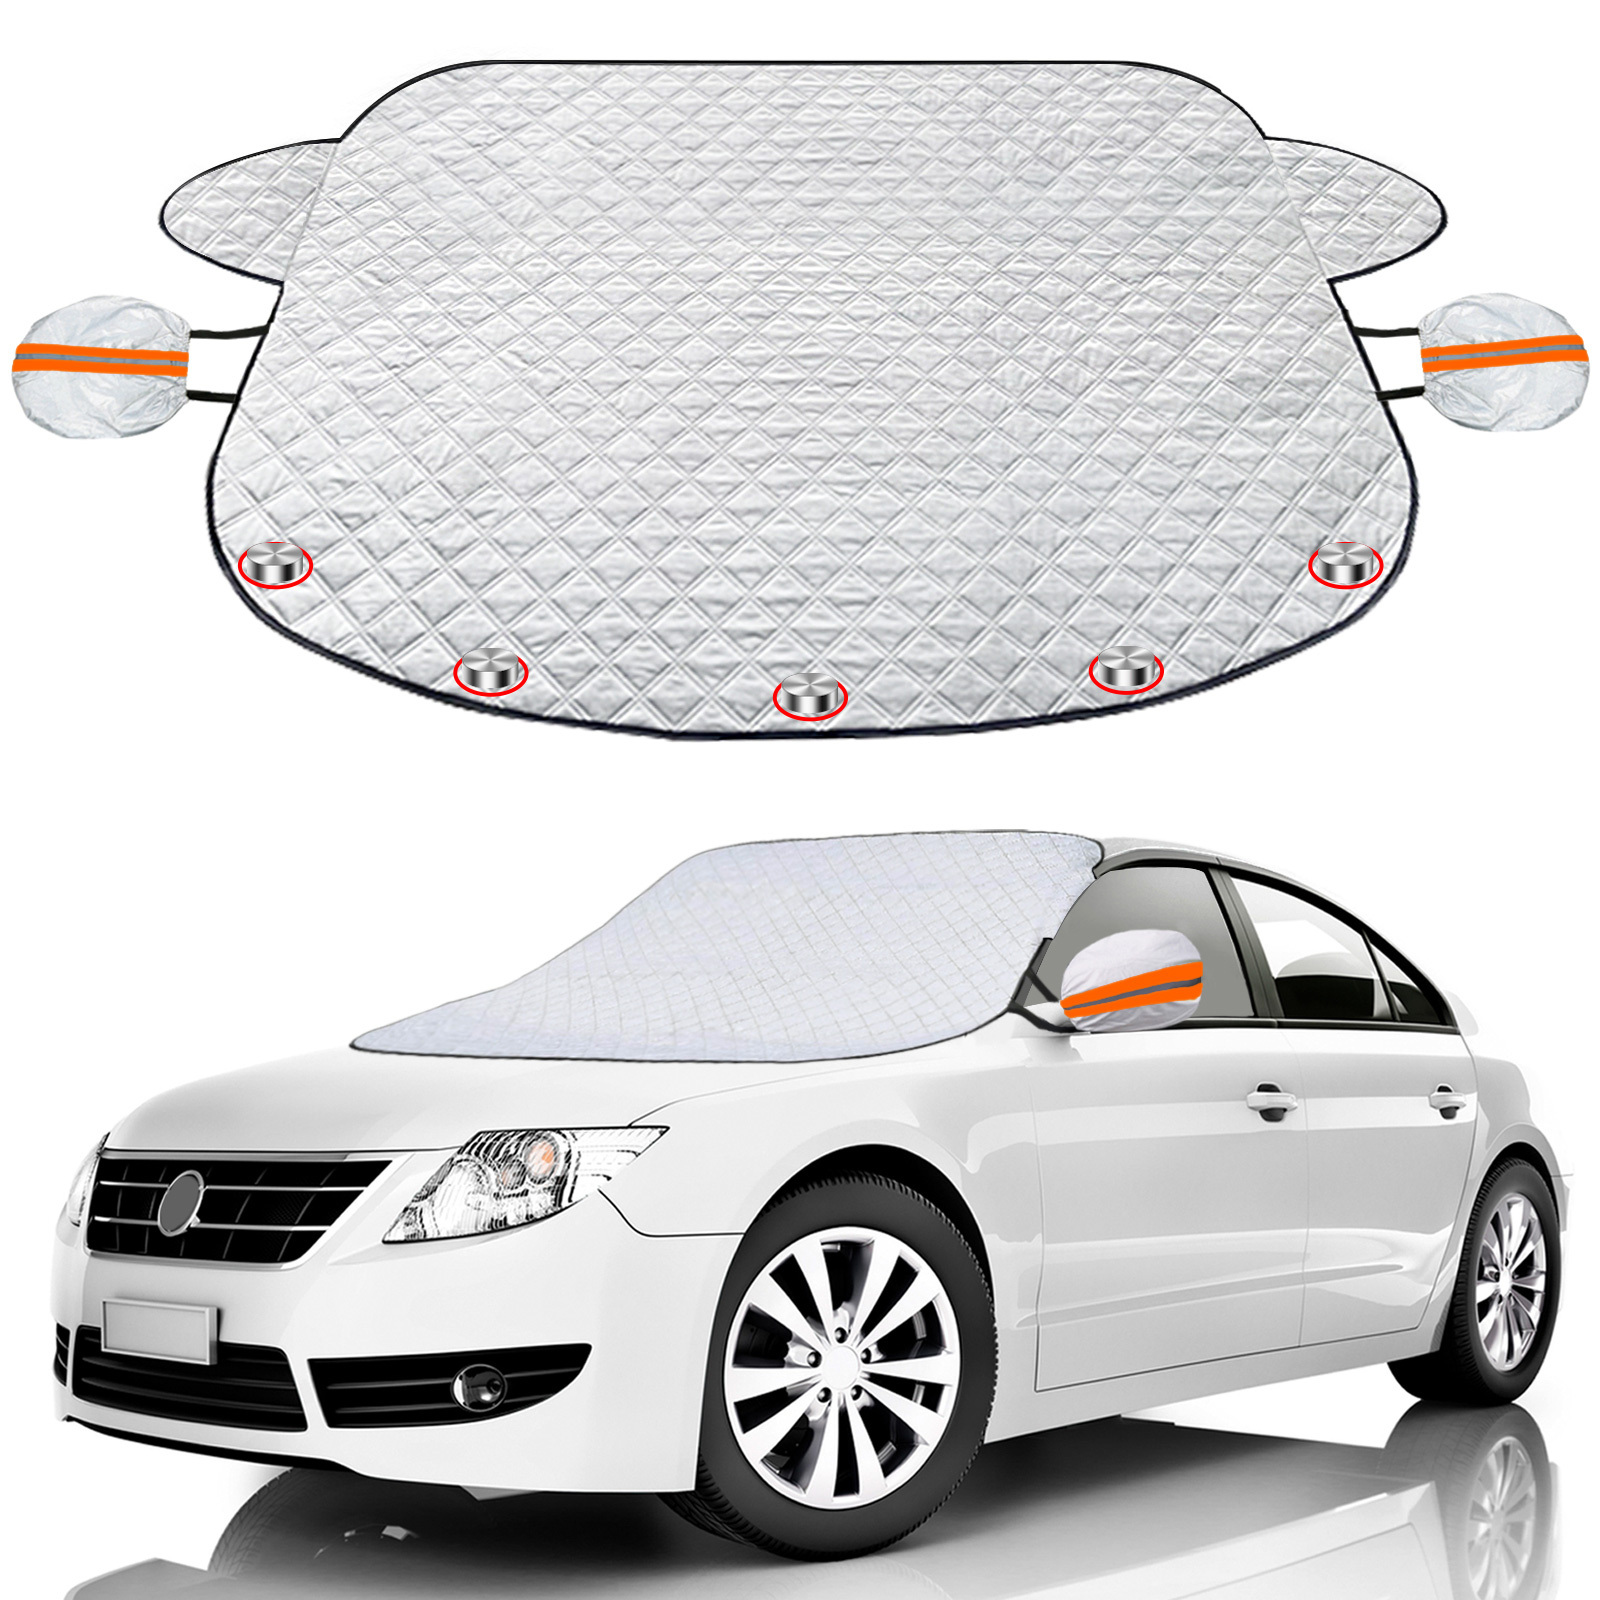 Windshield Snow Cover, Car Window Cover Ice and Snow Cover for Car with 4  Strong Magnets Edge & 4 Layer Material Protection, Large Size Suitable for  Most Cars and SUV - Automate Market